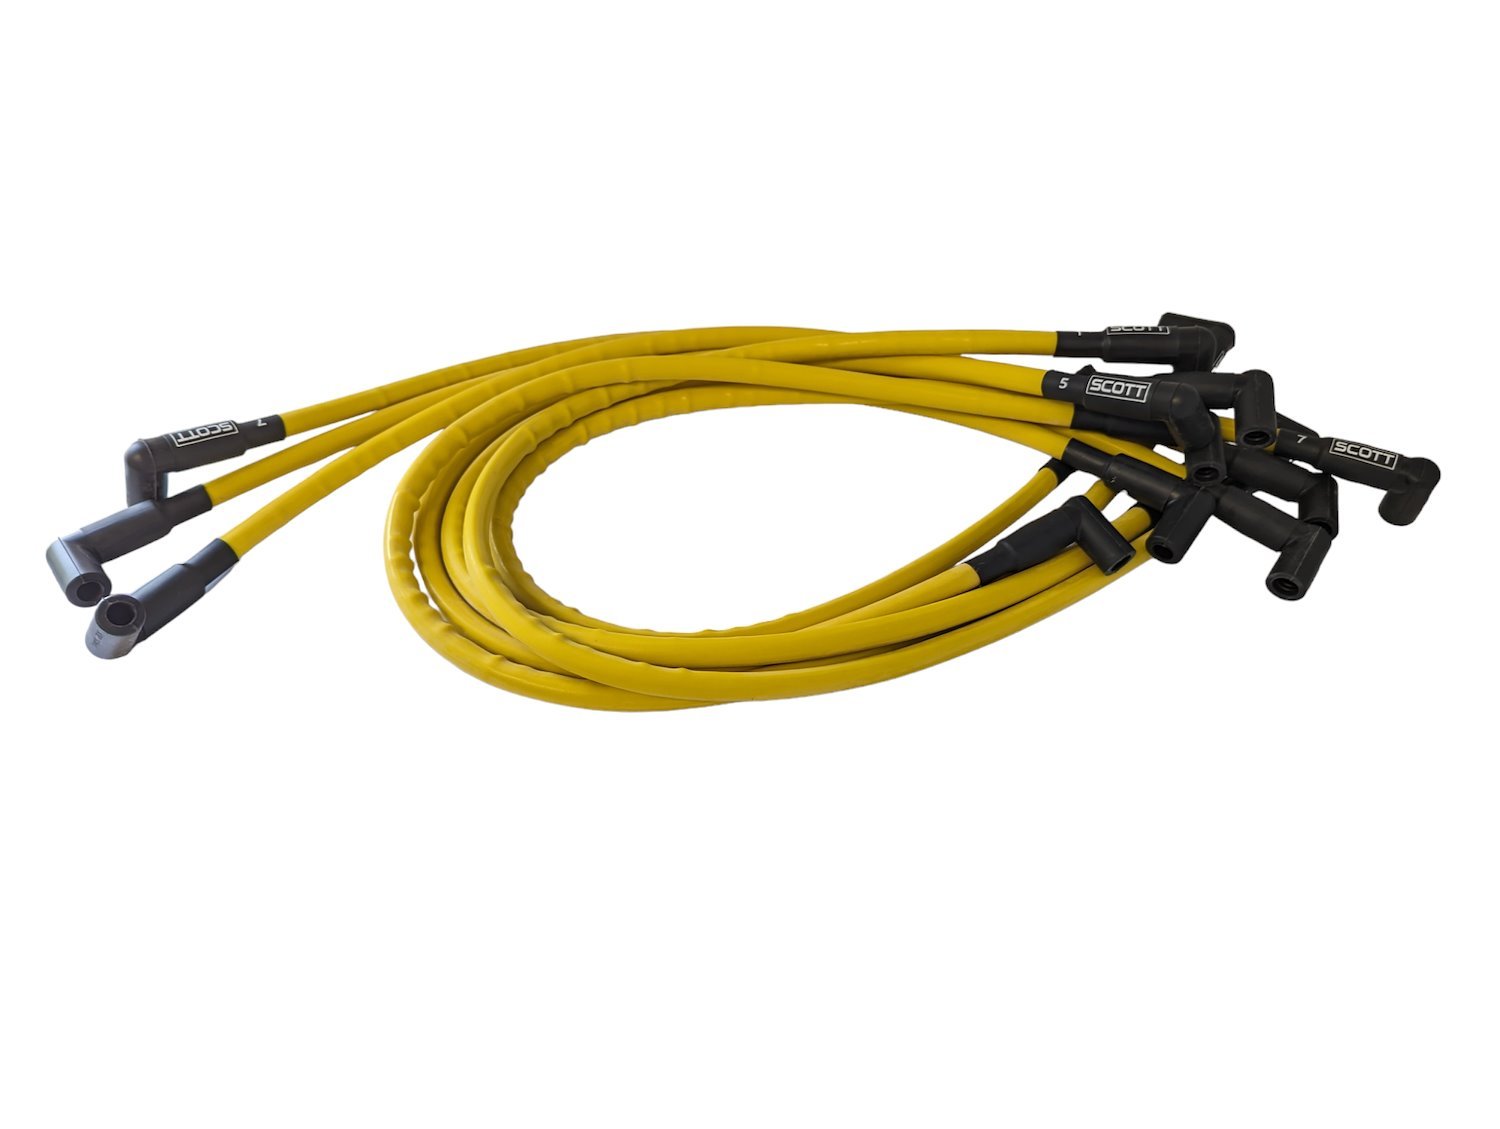 SPW-CH-402-7 High-Performance Silicone-Sleeved Spark Plug Wire Set for Small Block Chevy, Over Valve Cover [Yellow]